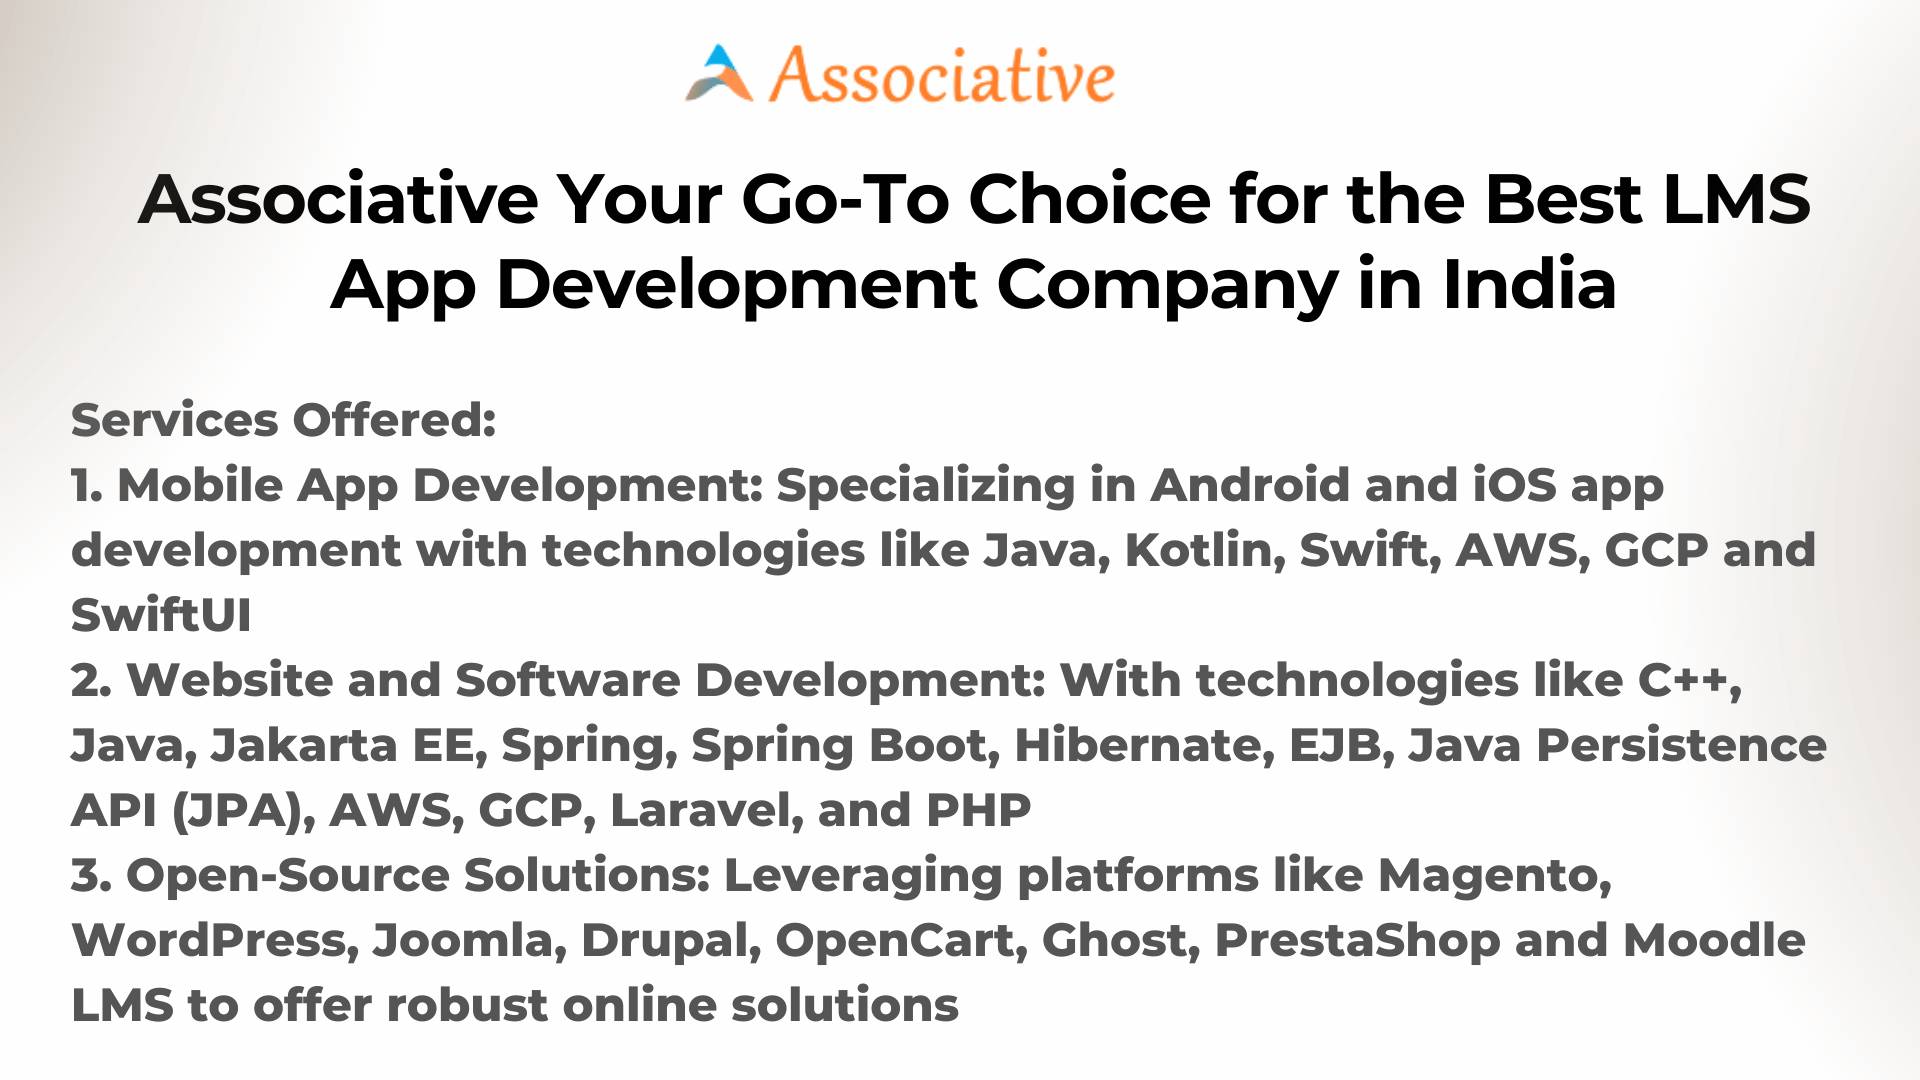 Associative Your Go-To Choice for the Best LMS App Development Company in India